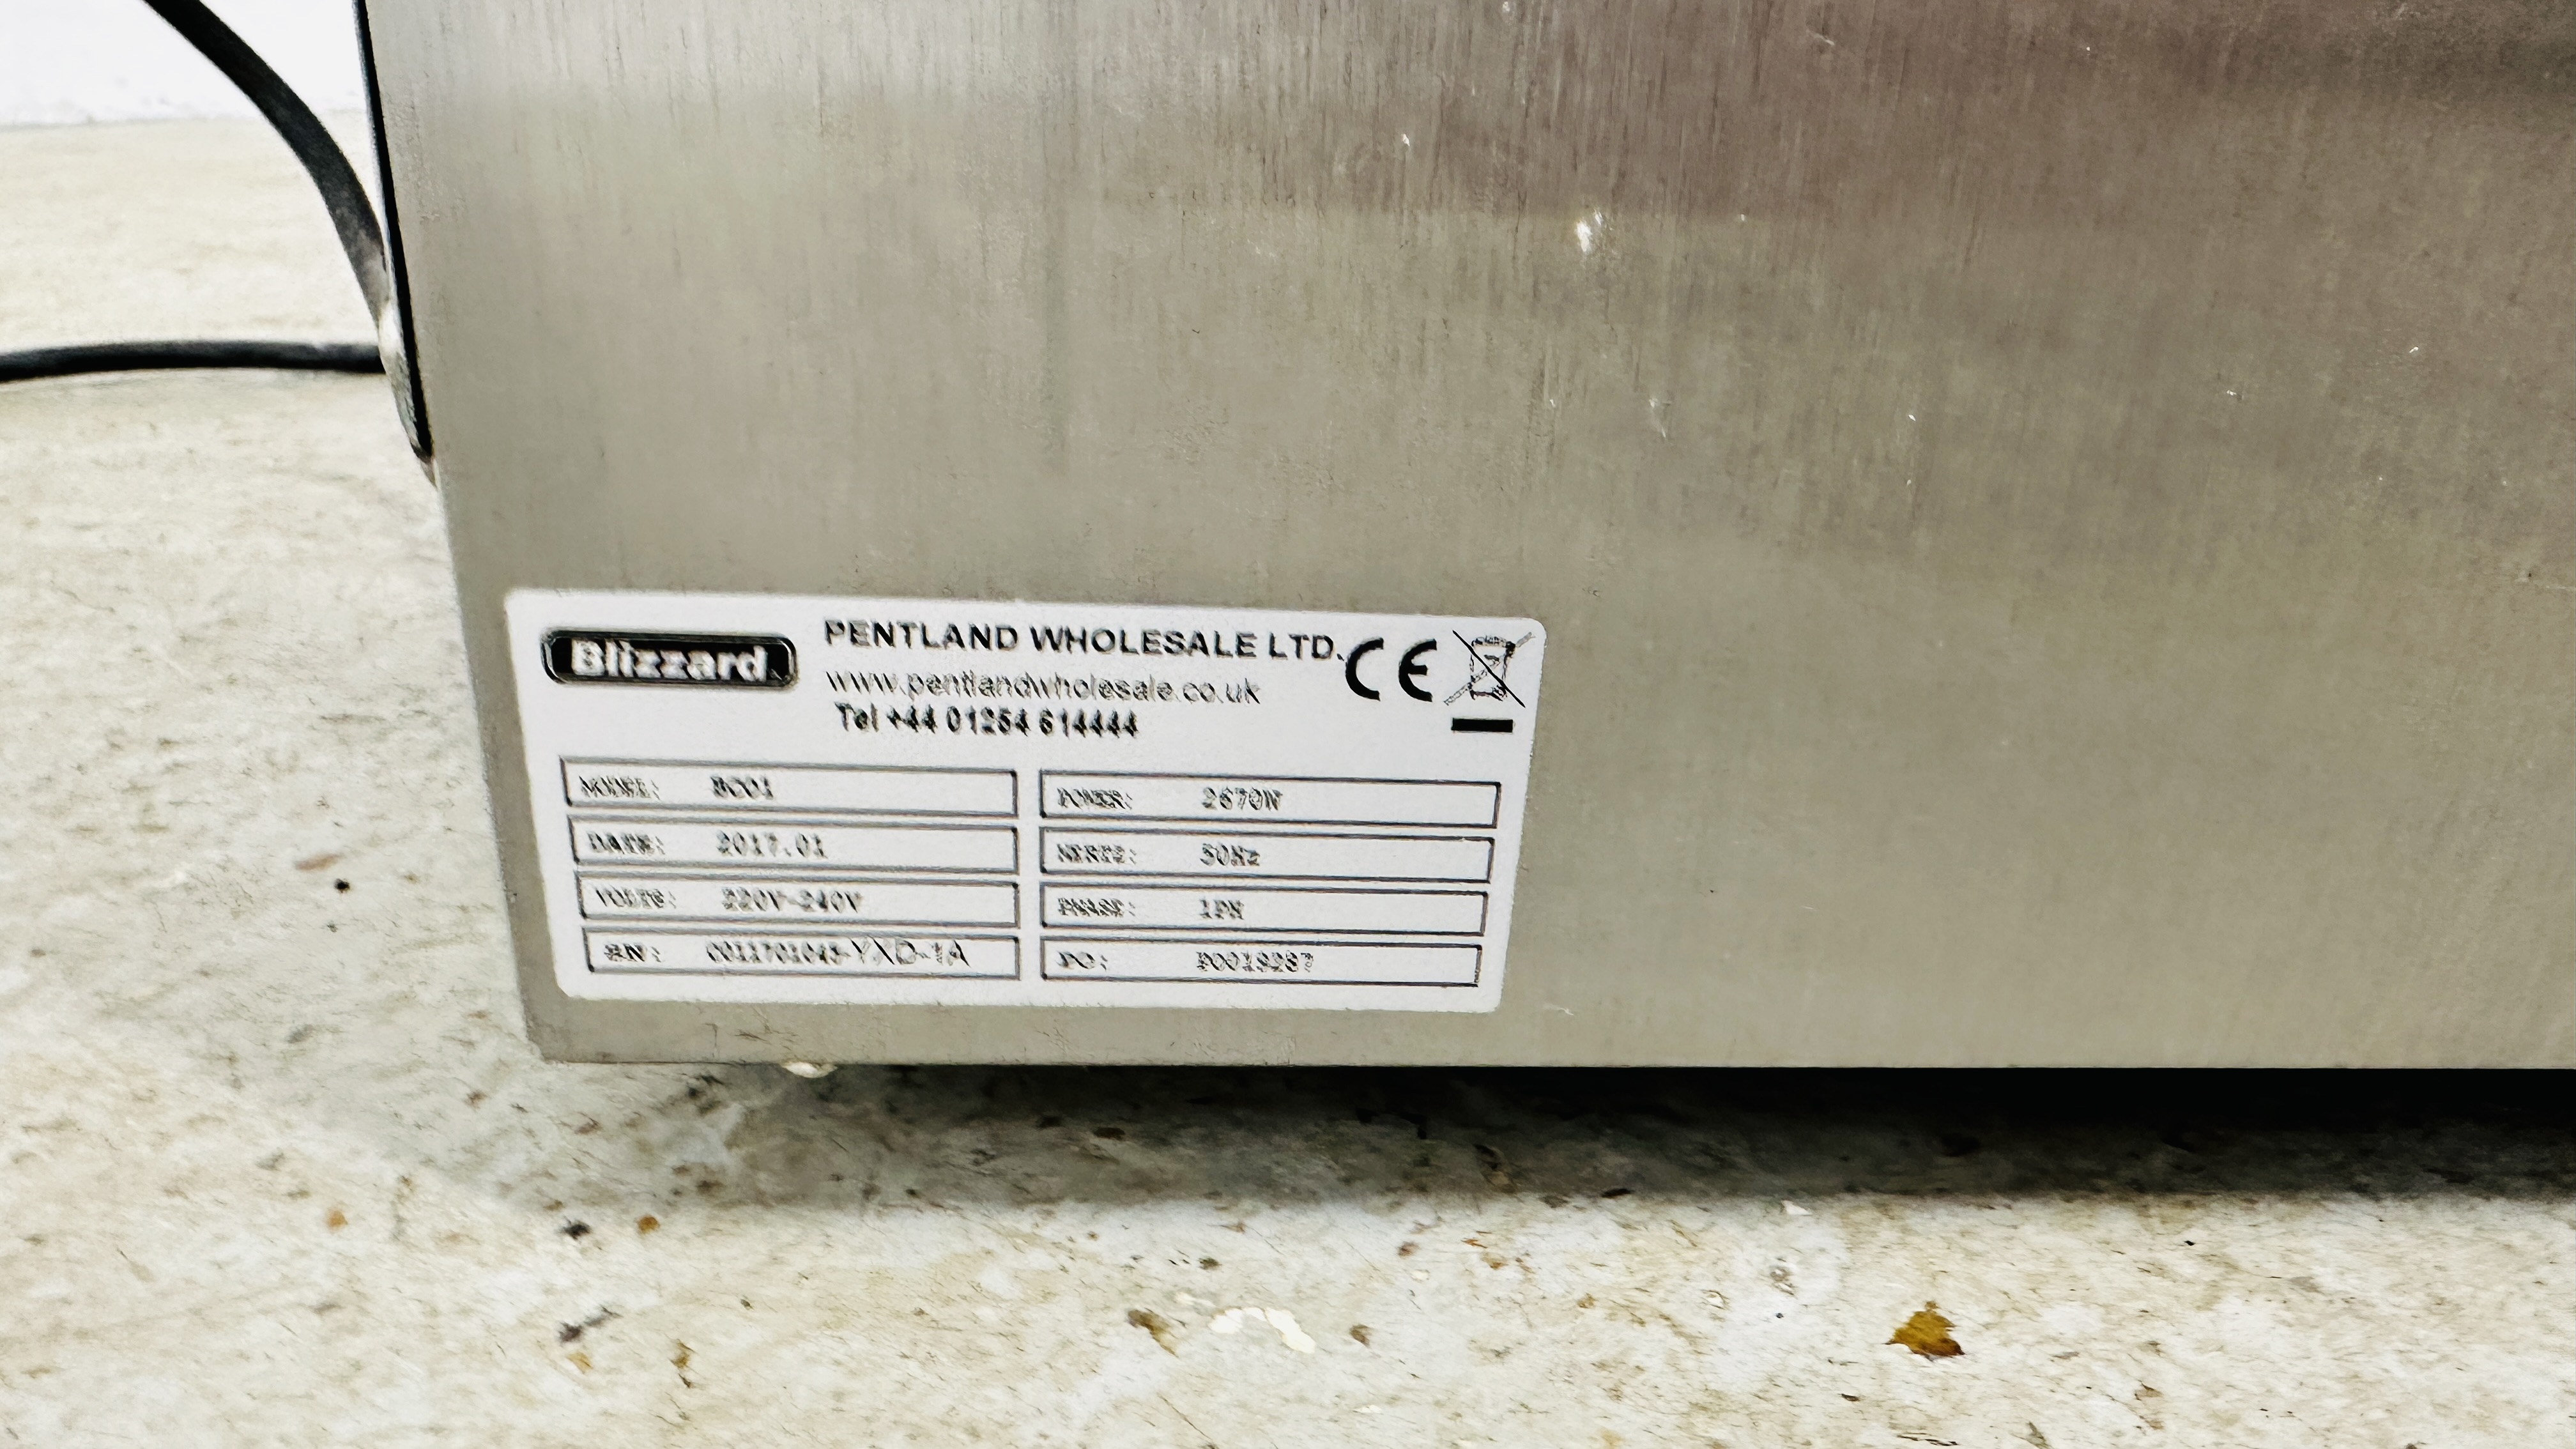 BLIZZARD MEDIUM DUTY 60 LITRE ELECTRIC MANUAL COUNTER TOP CONVECTION OVEN MODEL - BC 01 - SOLD AS - Image 5 of 7